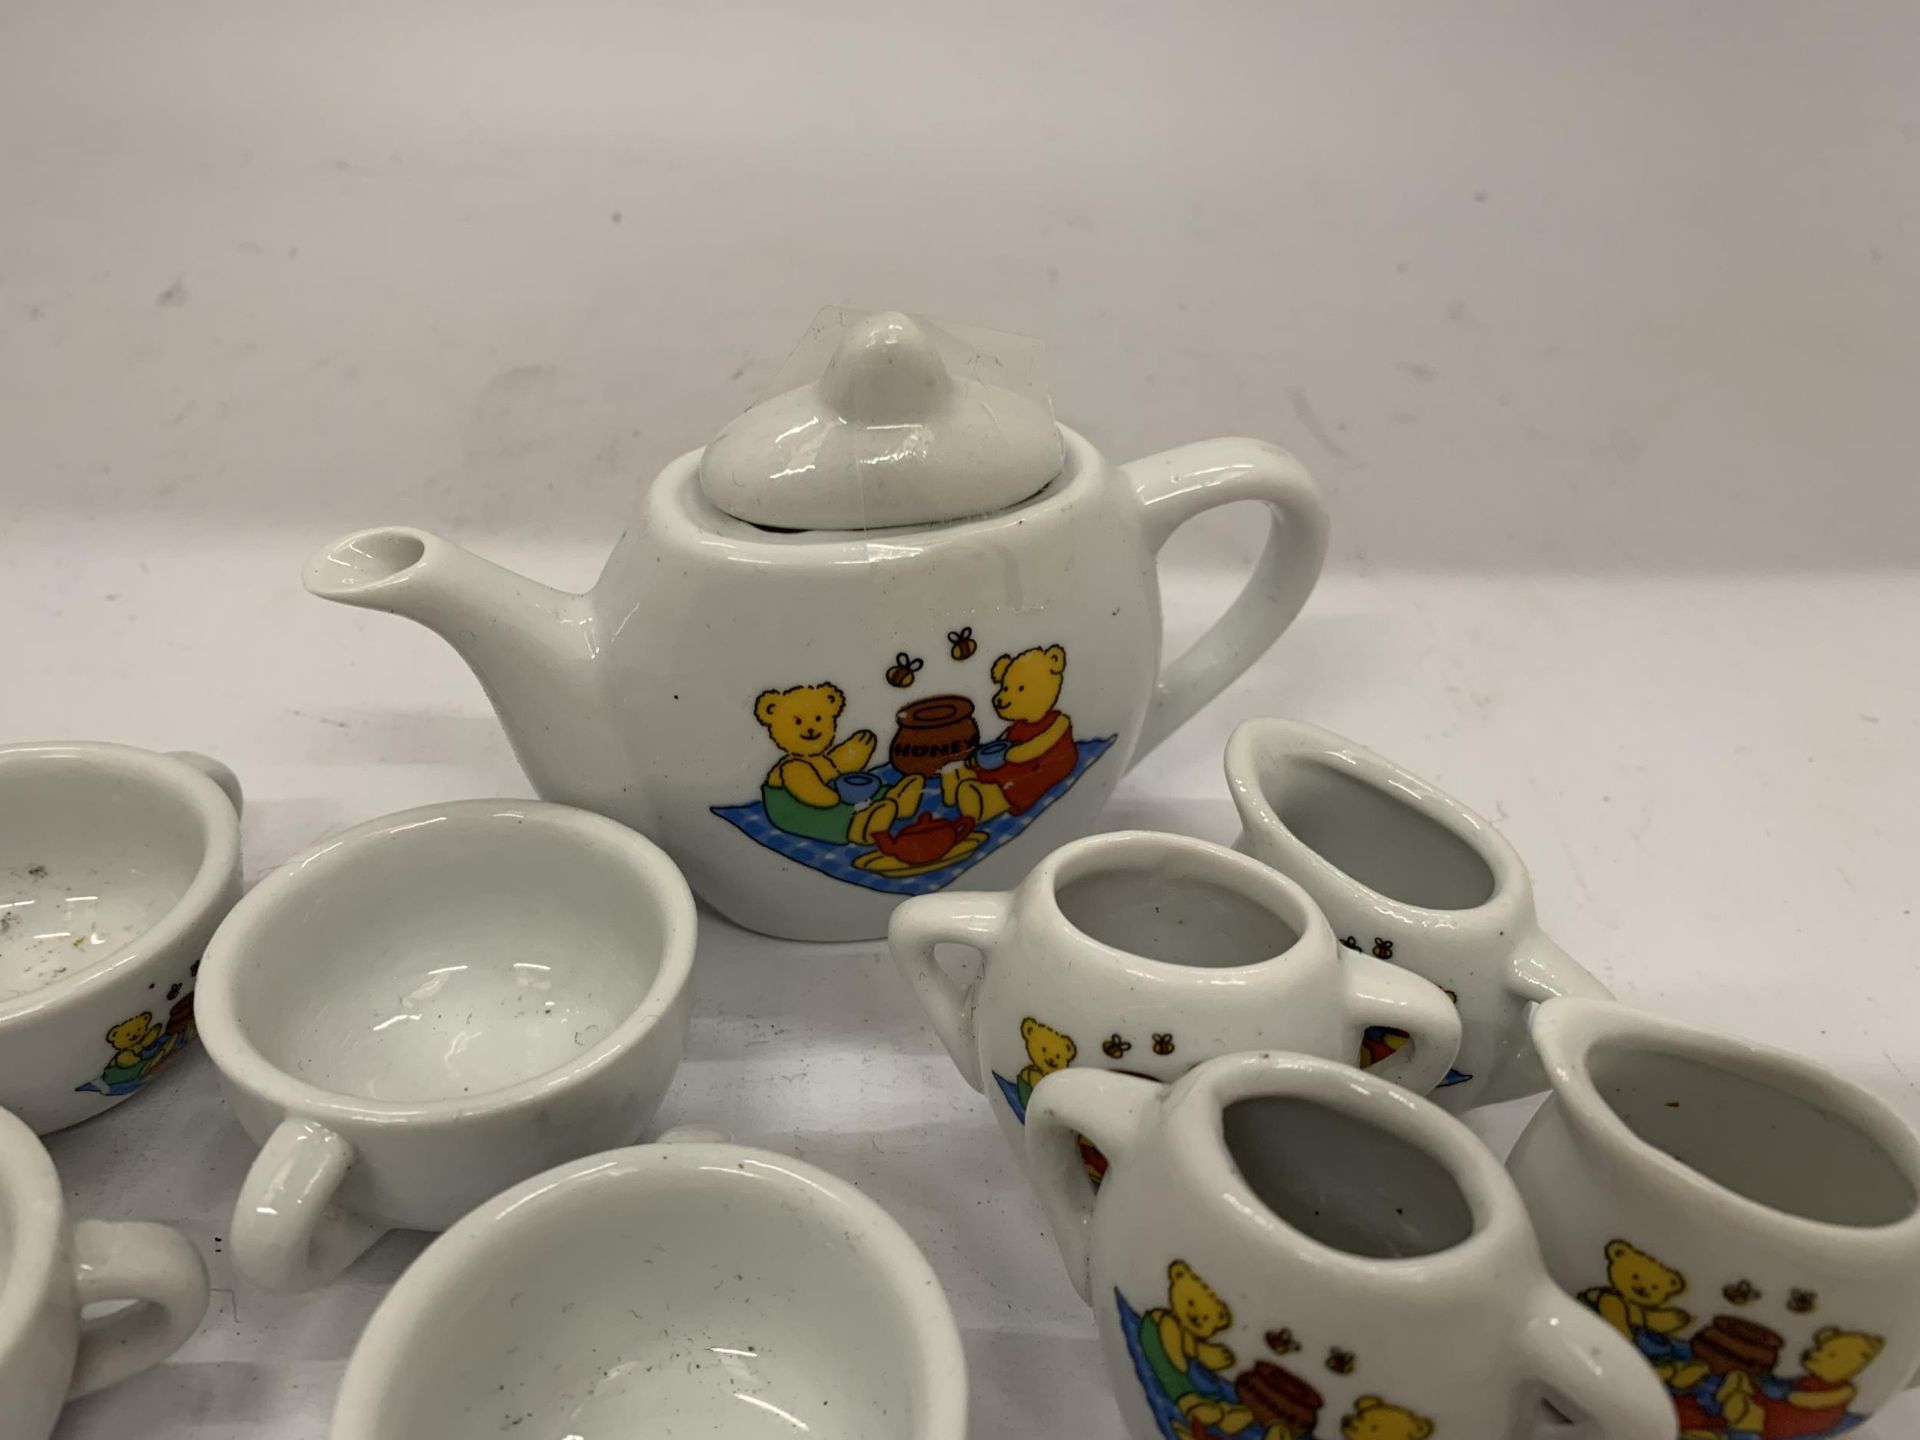 A MINIATURE CHILD'S POTTERY TEASET TO INCLUDE TEAPOT, JUGS, CUPS, ETC WITH A TEDDY BEARS PICNIC - Image 5 of 10